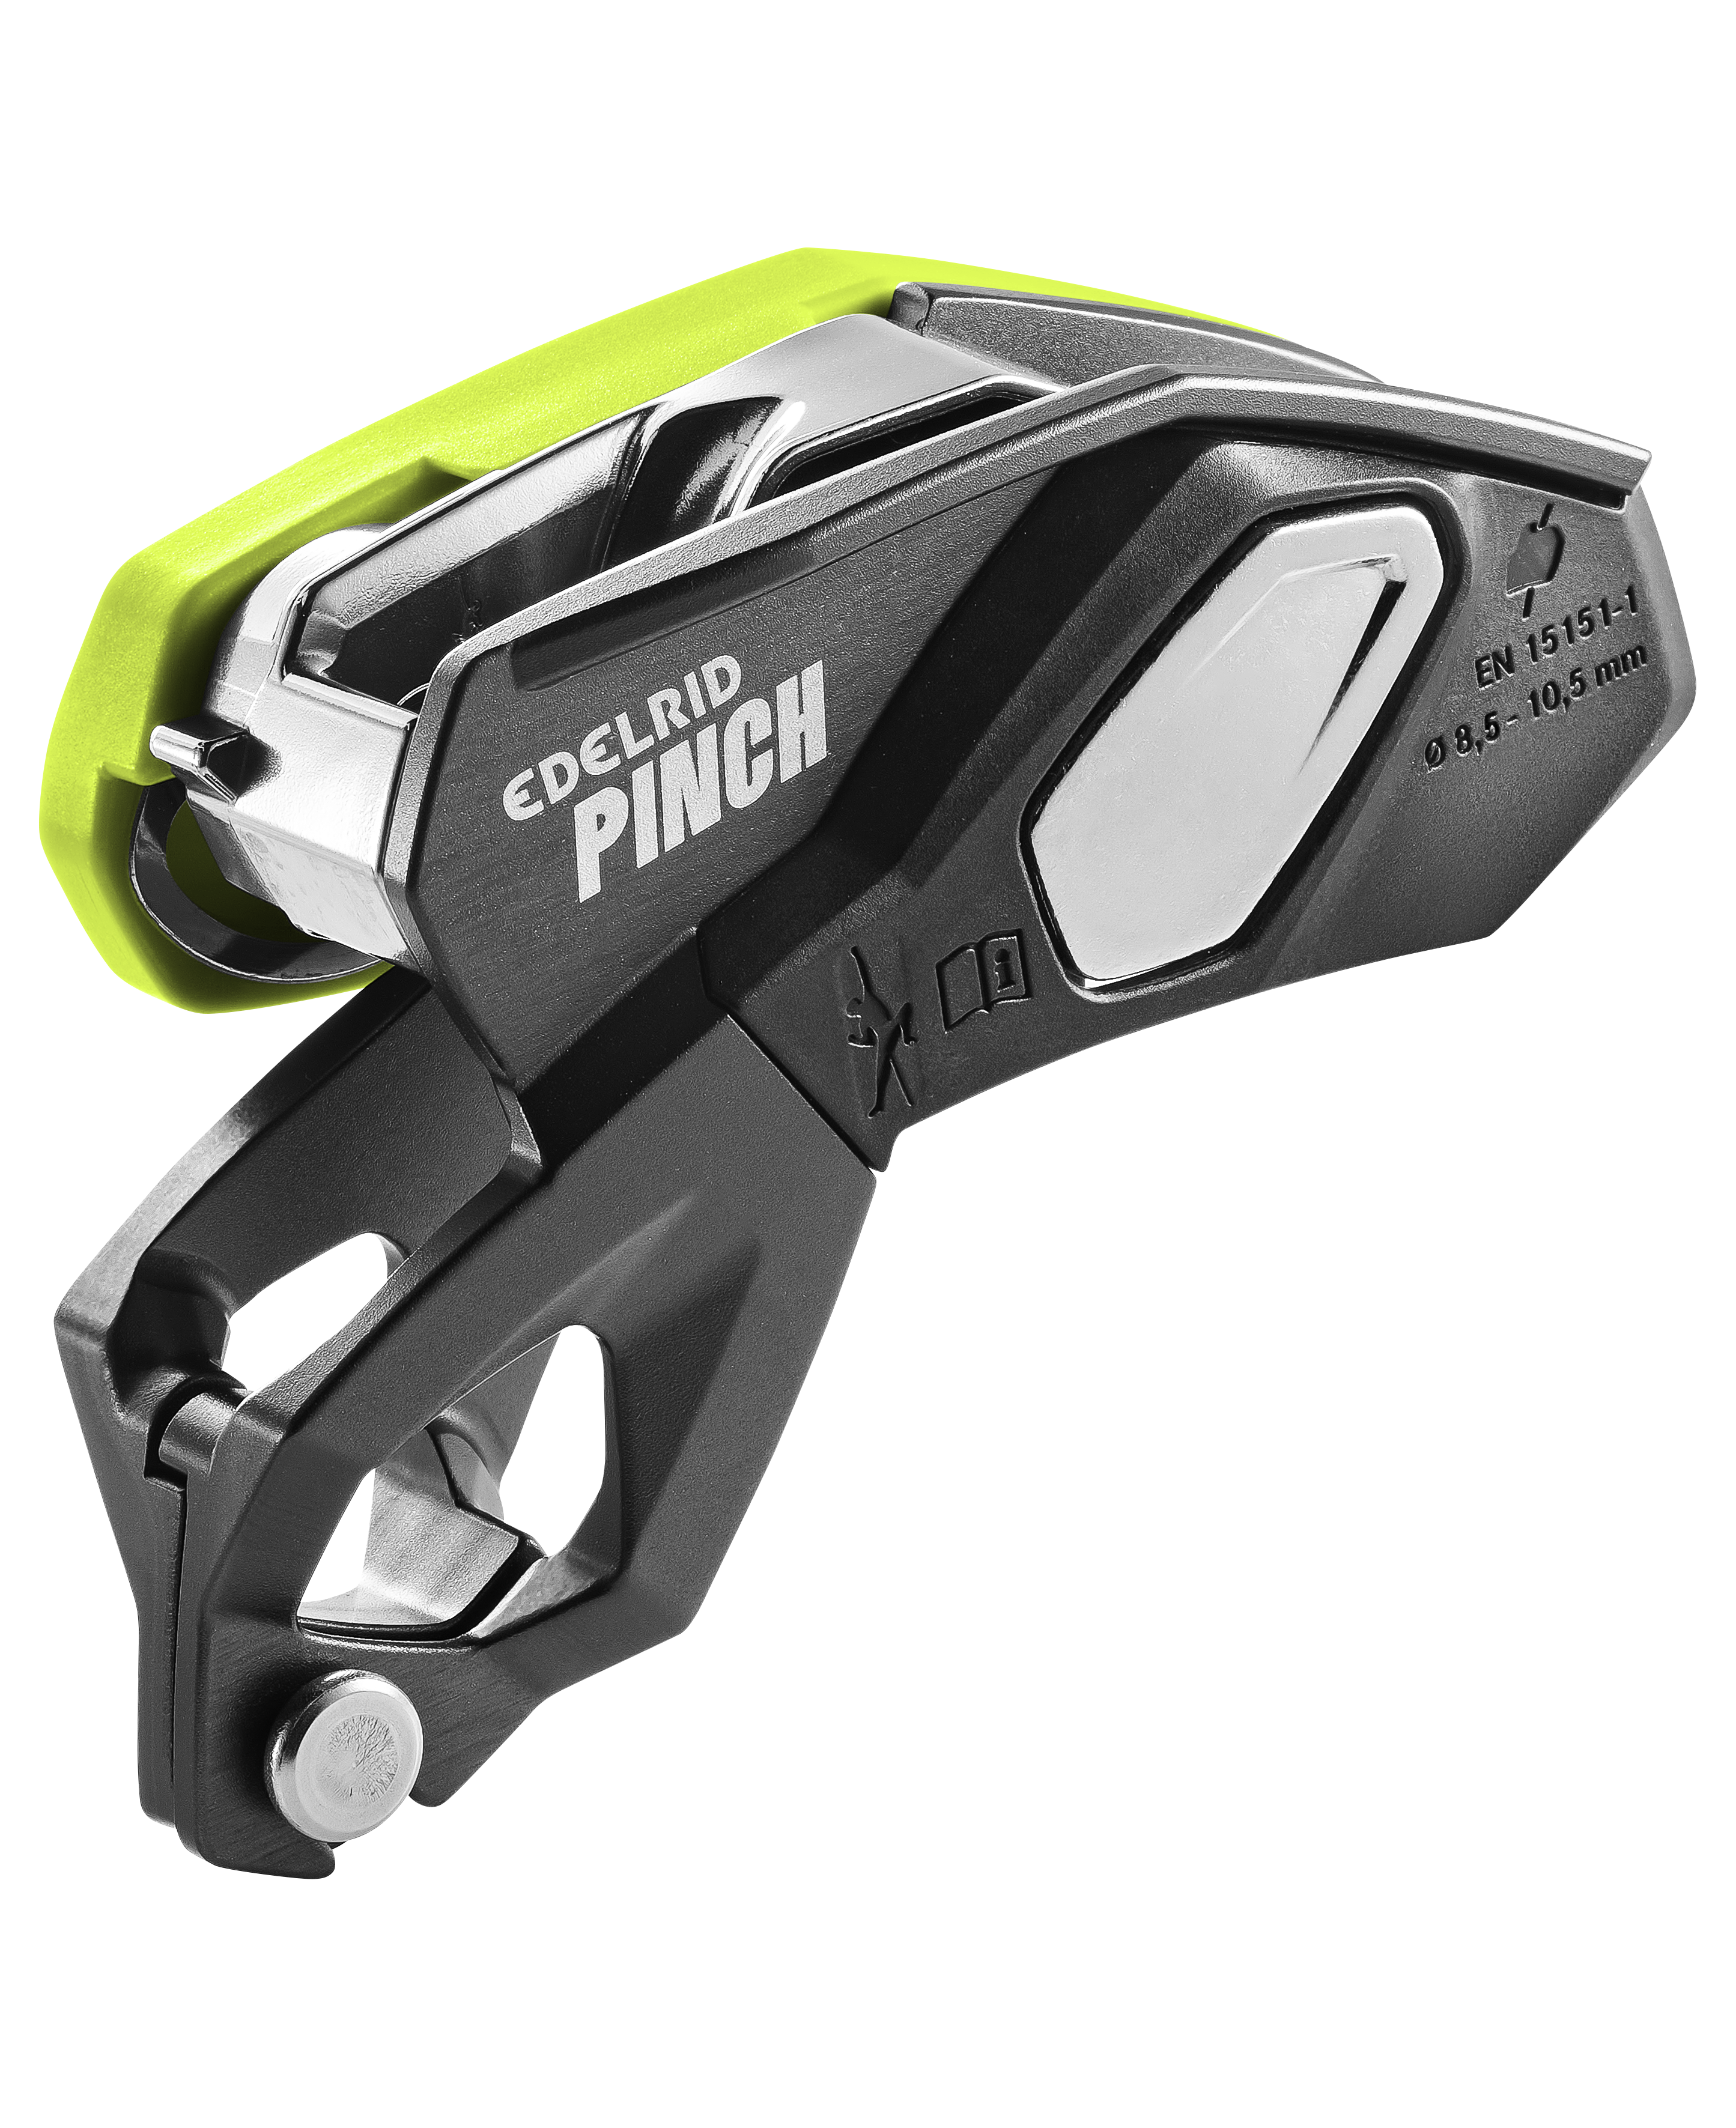 Edelrid Pinch Anthracite/Oasis